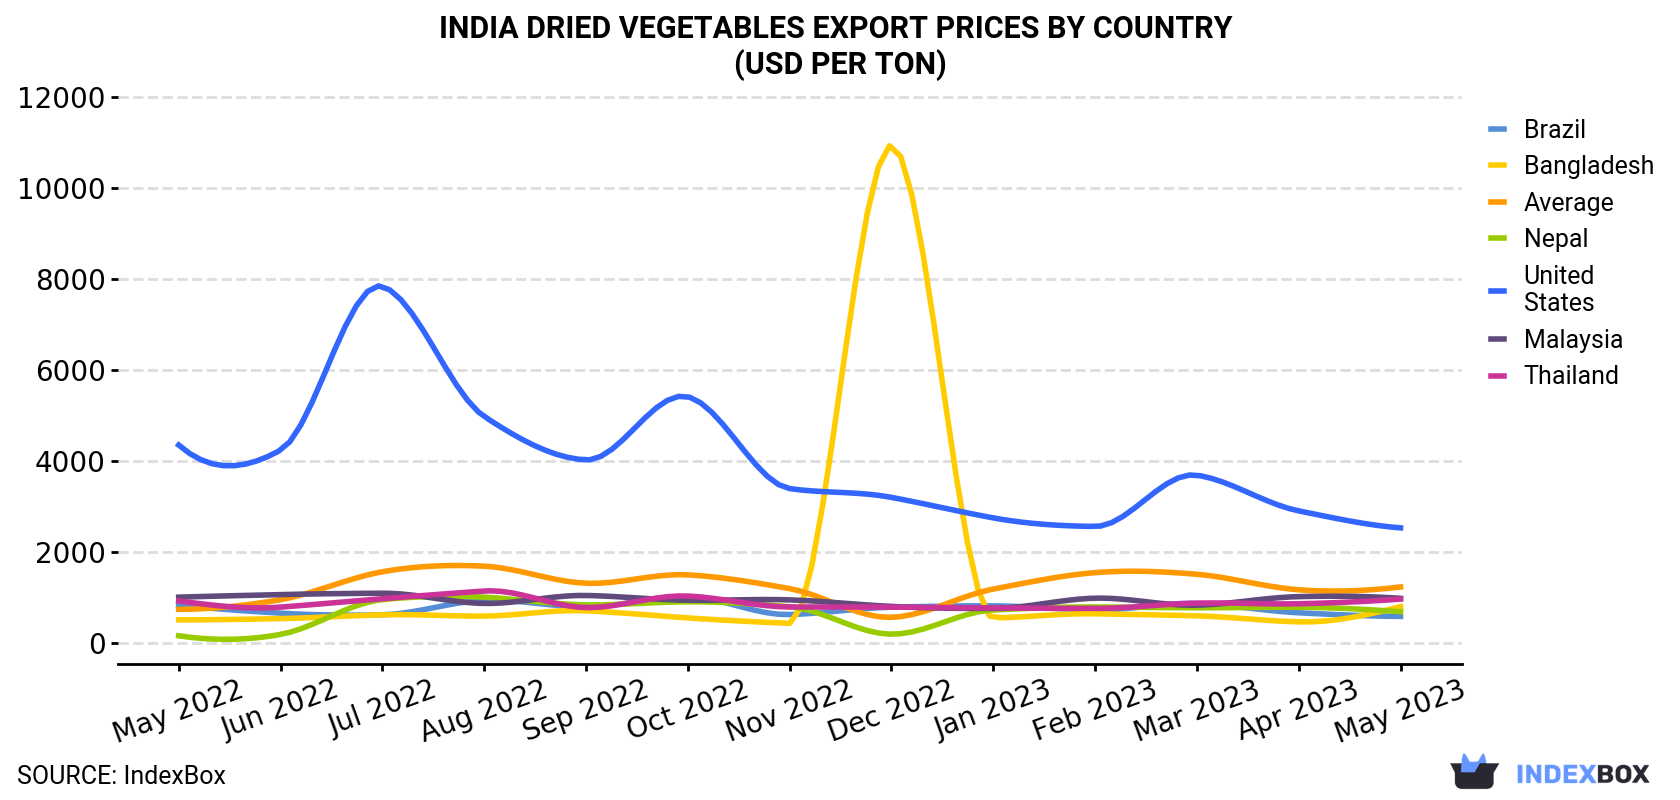 India Dried Vegetables Export Prices By Country (USD Per Ton)